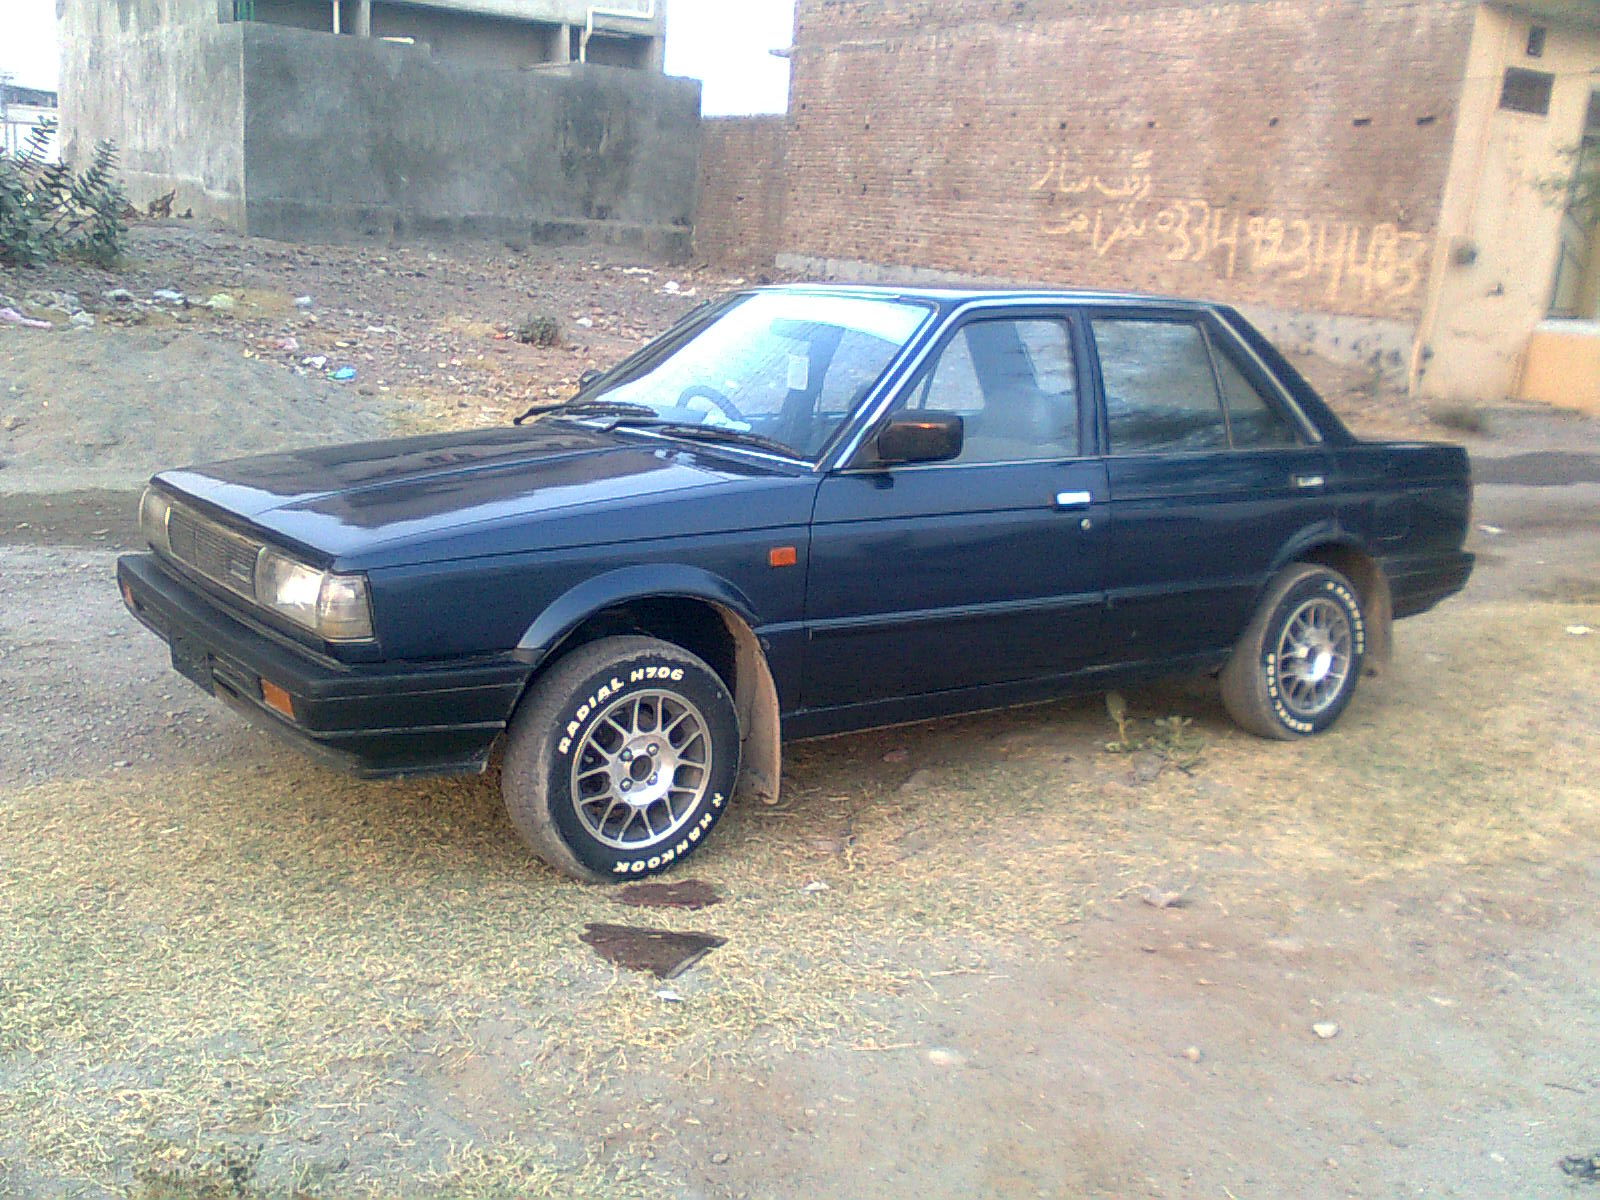 Nissan sunny 88 for sale in pakistan #3